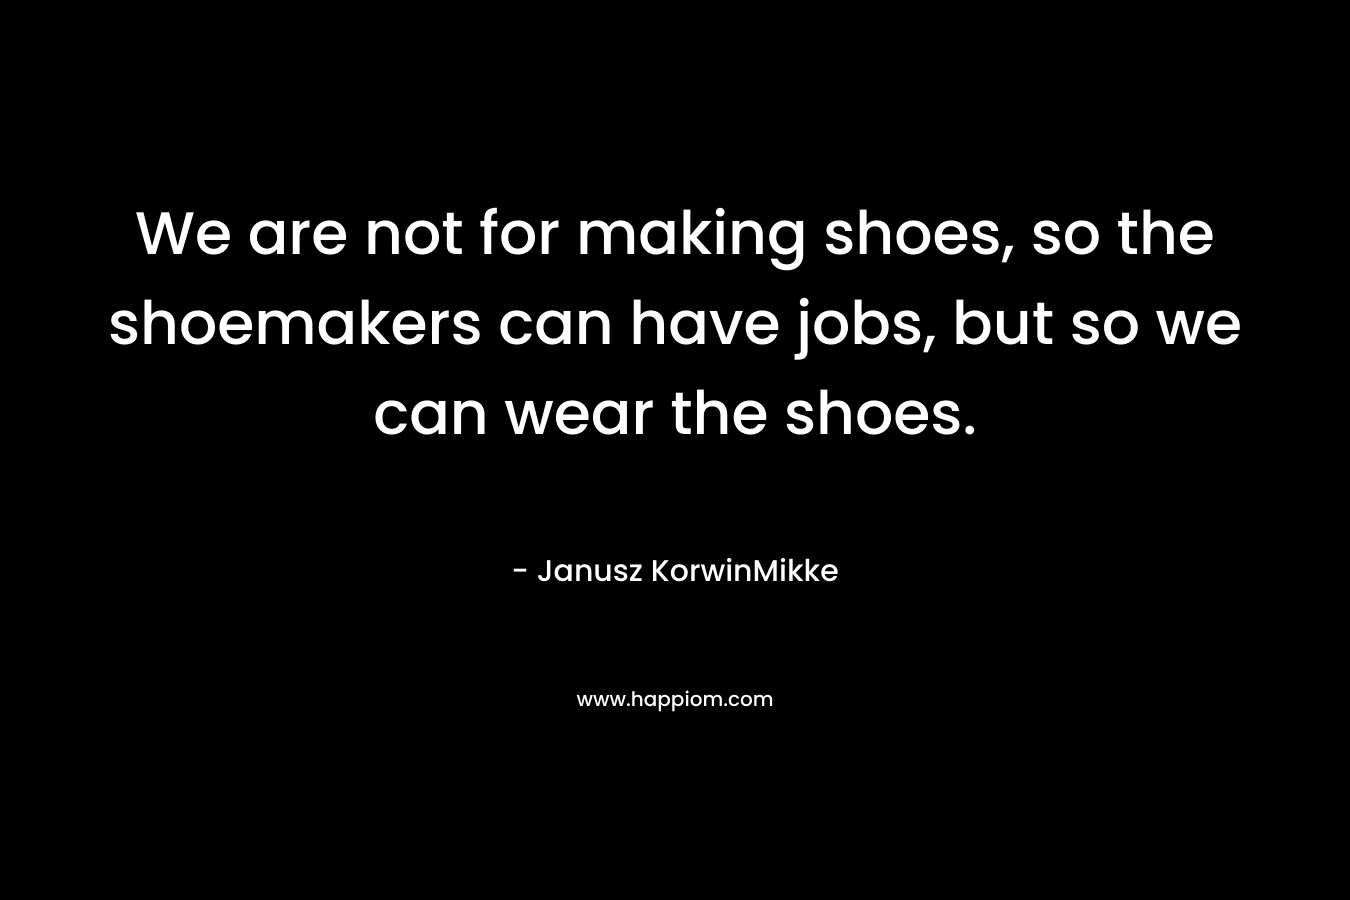 We are not for making shoes, so the shoemakers can have jobs, but so we can wear the shoes.